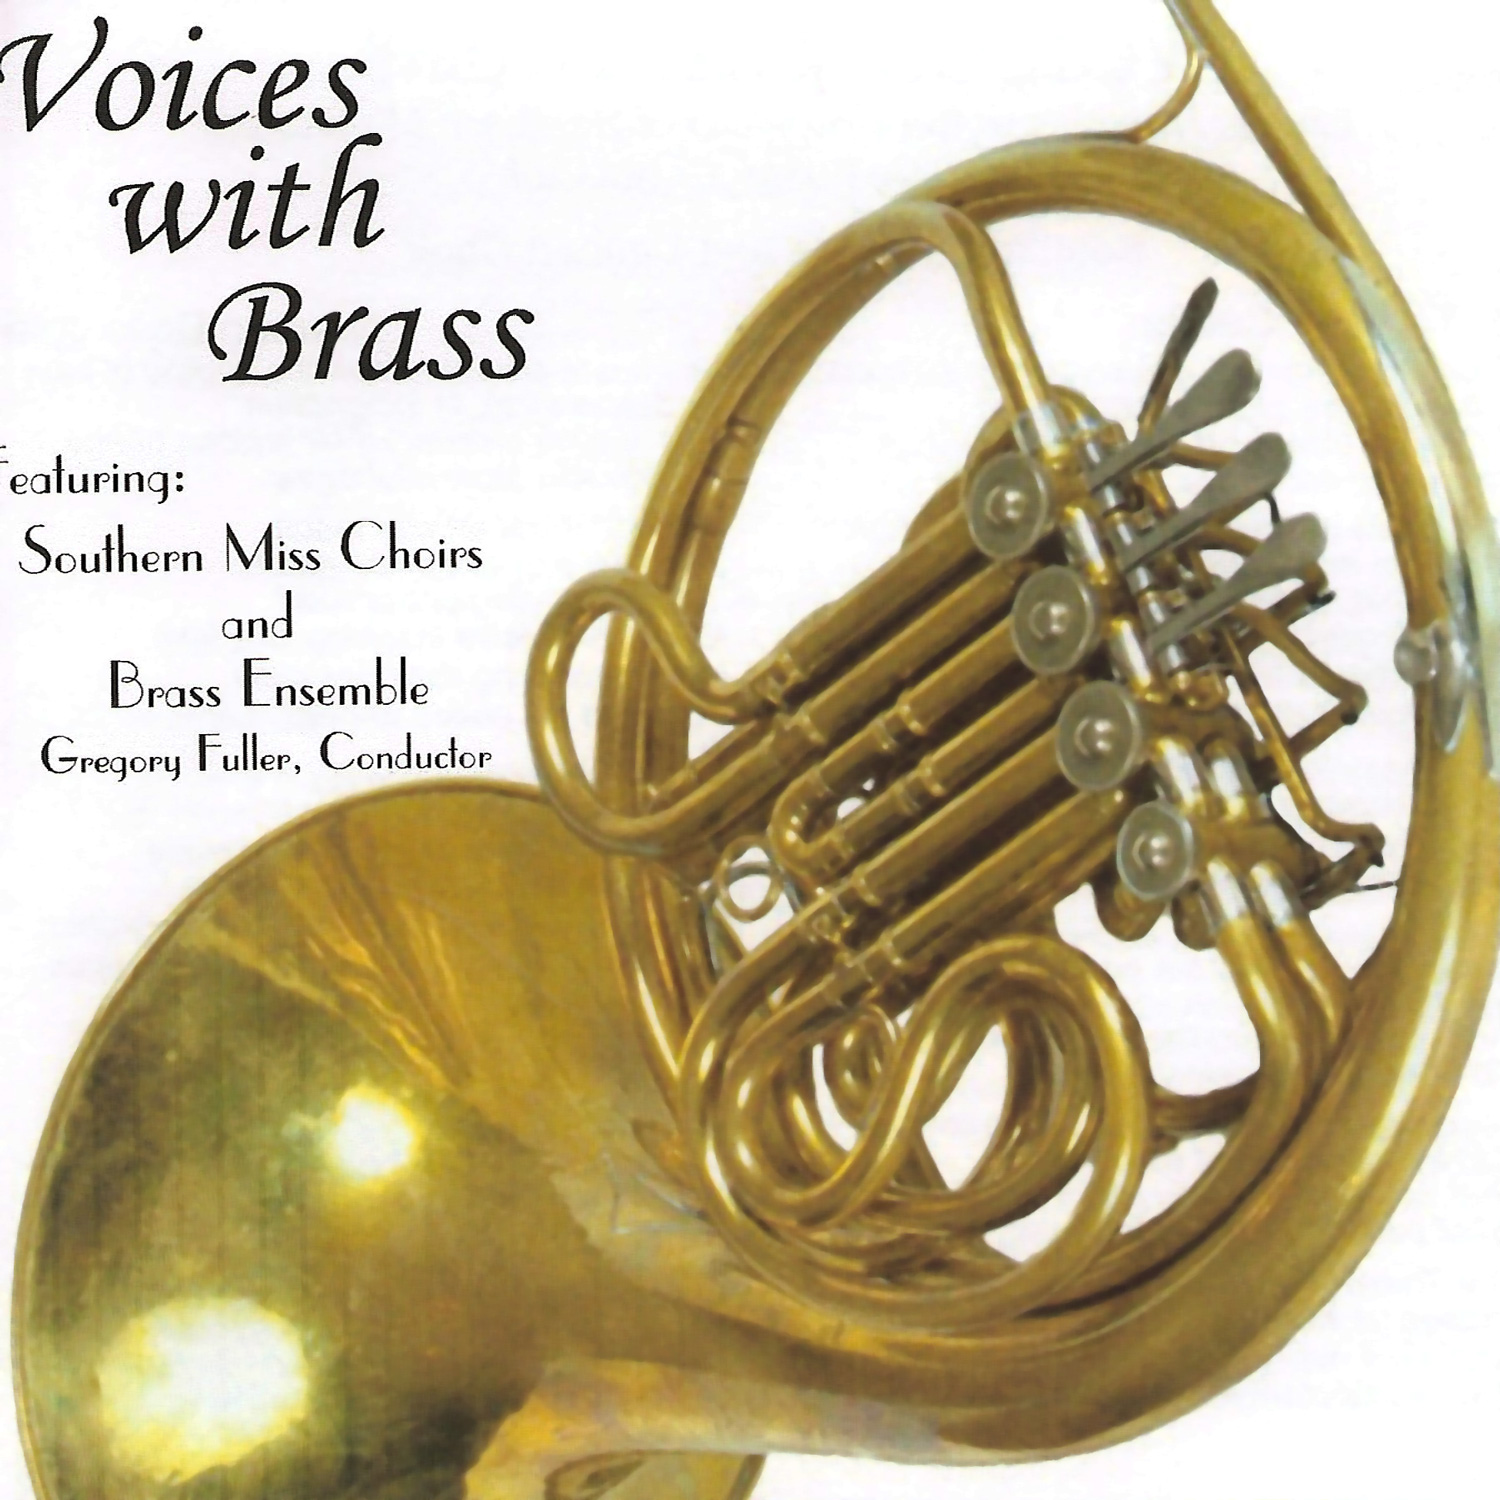 Voices with Brass